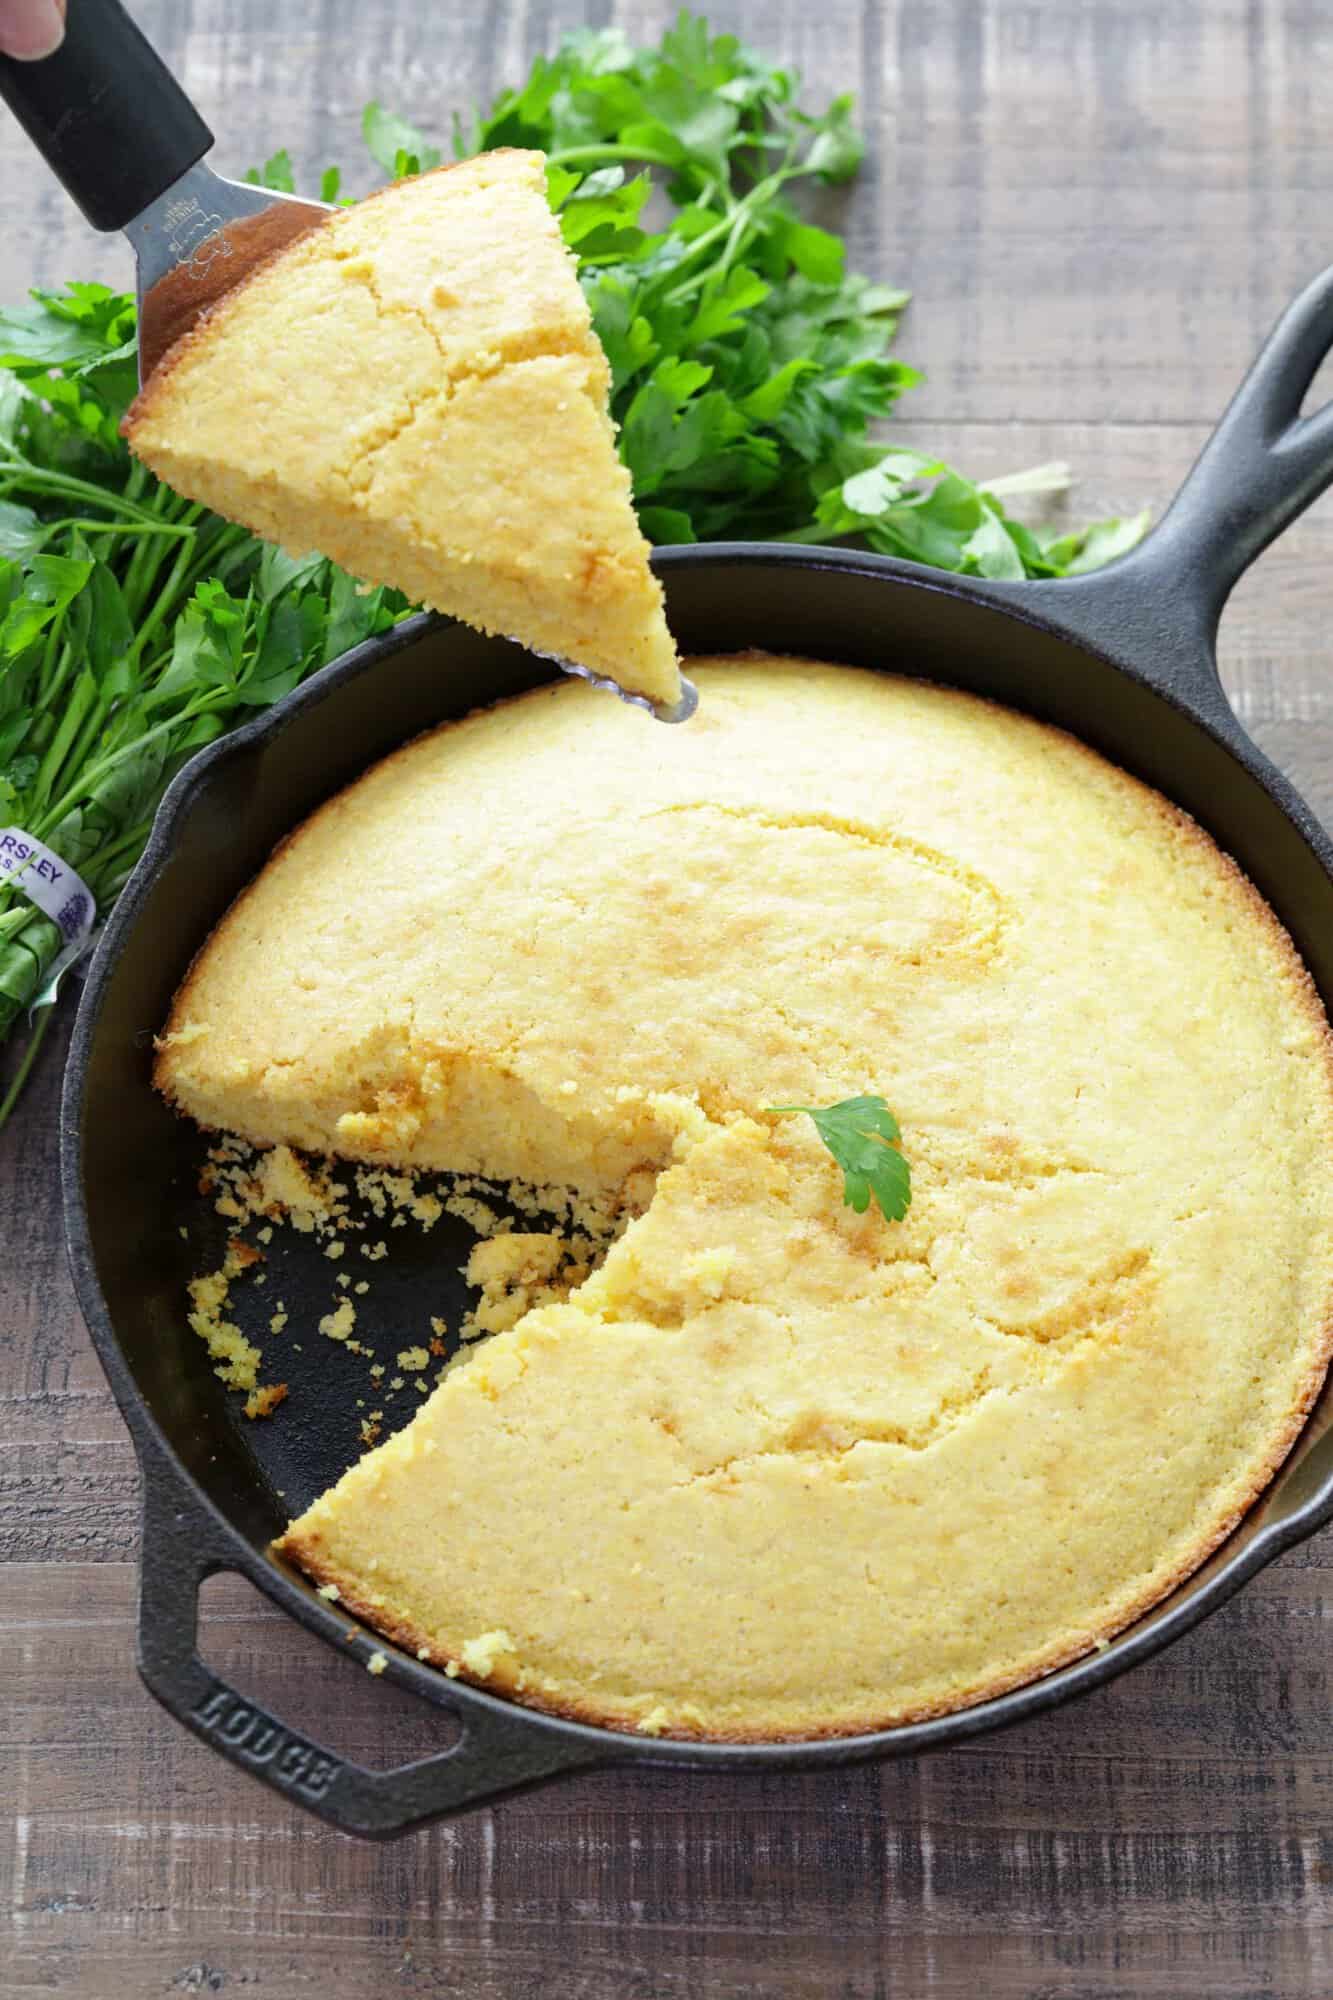 Slice of cornbread being held over skillet full of cornbread with slice removed